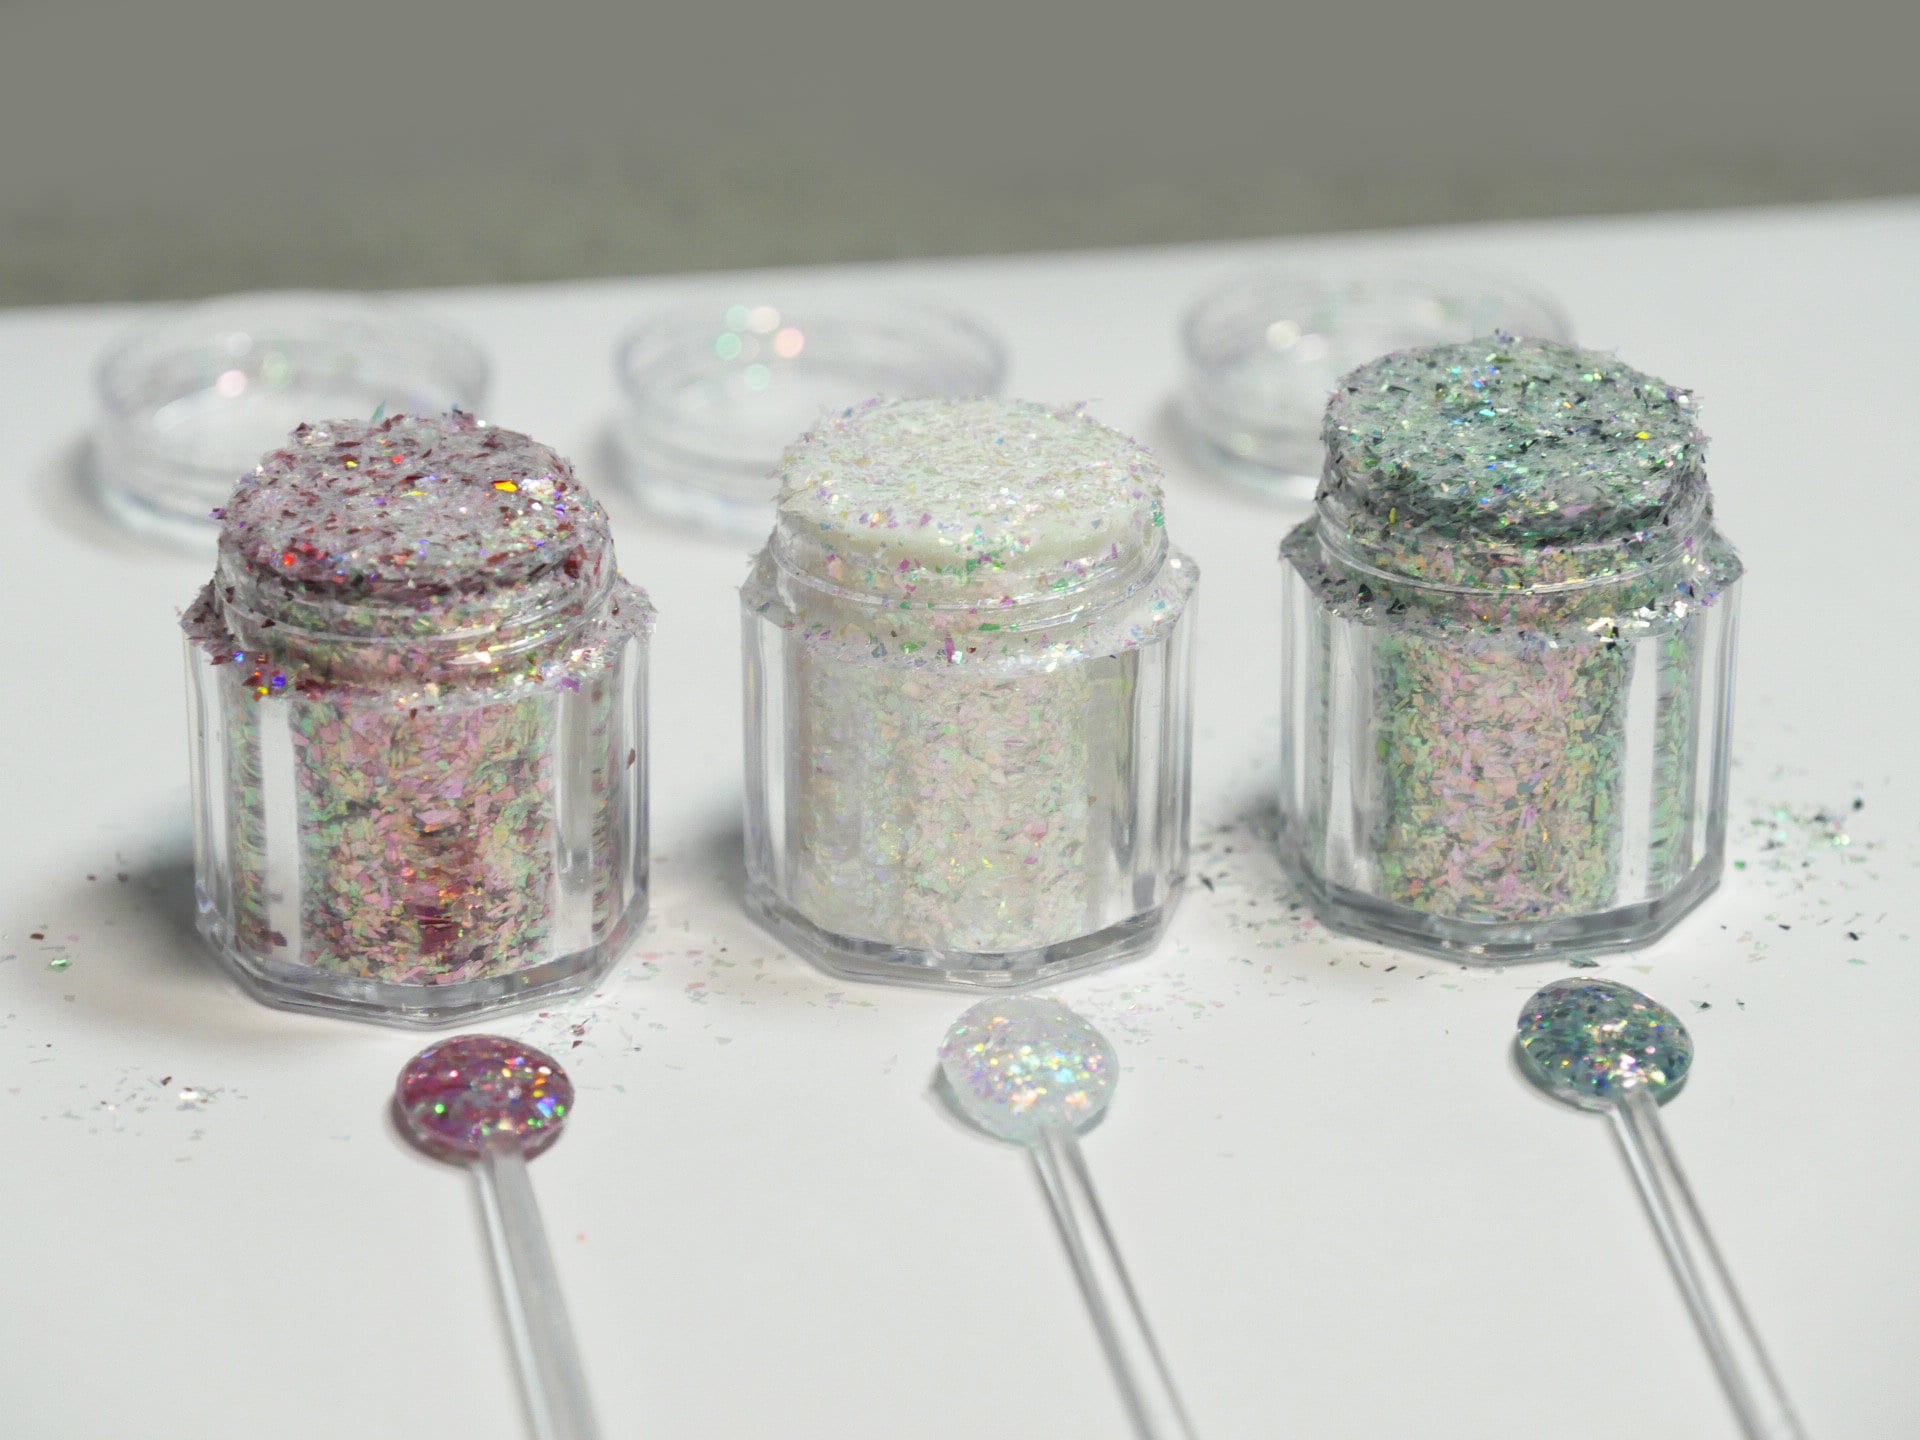 Opal Illusion Cloud Brocade Fragmentation Flakes Glitters Sequins For Nail Art/ Holographic Polarized Aurora Foils Manicure Supply